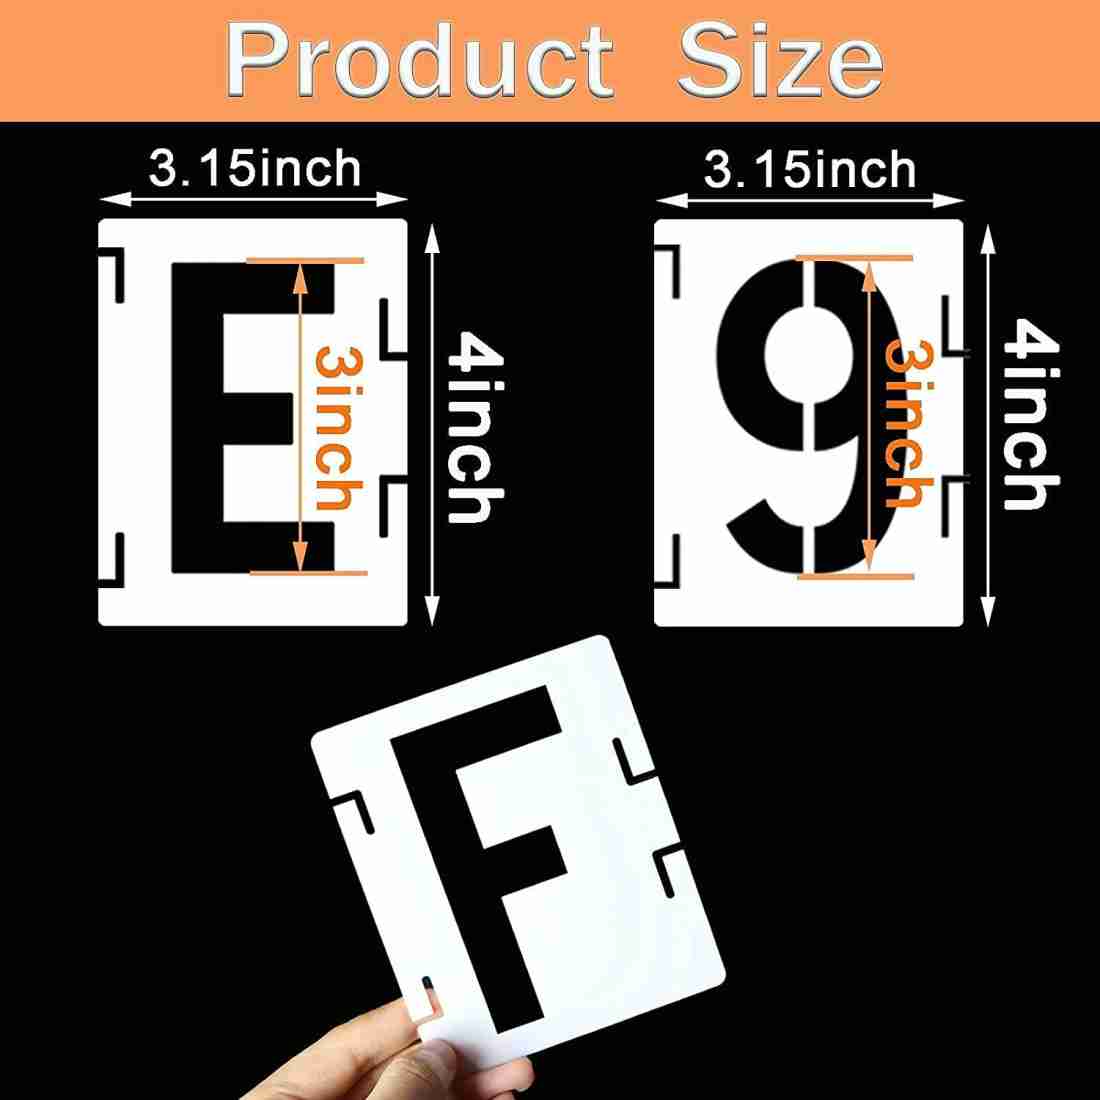 2 Inch Alphabet Letter Stencils, 62 Pcs Reusable Plastic Letter Number  Templates, Art Craft Stencils for Wood, Wall, Fabric, Rock, Chalkboard